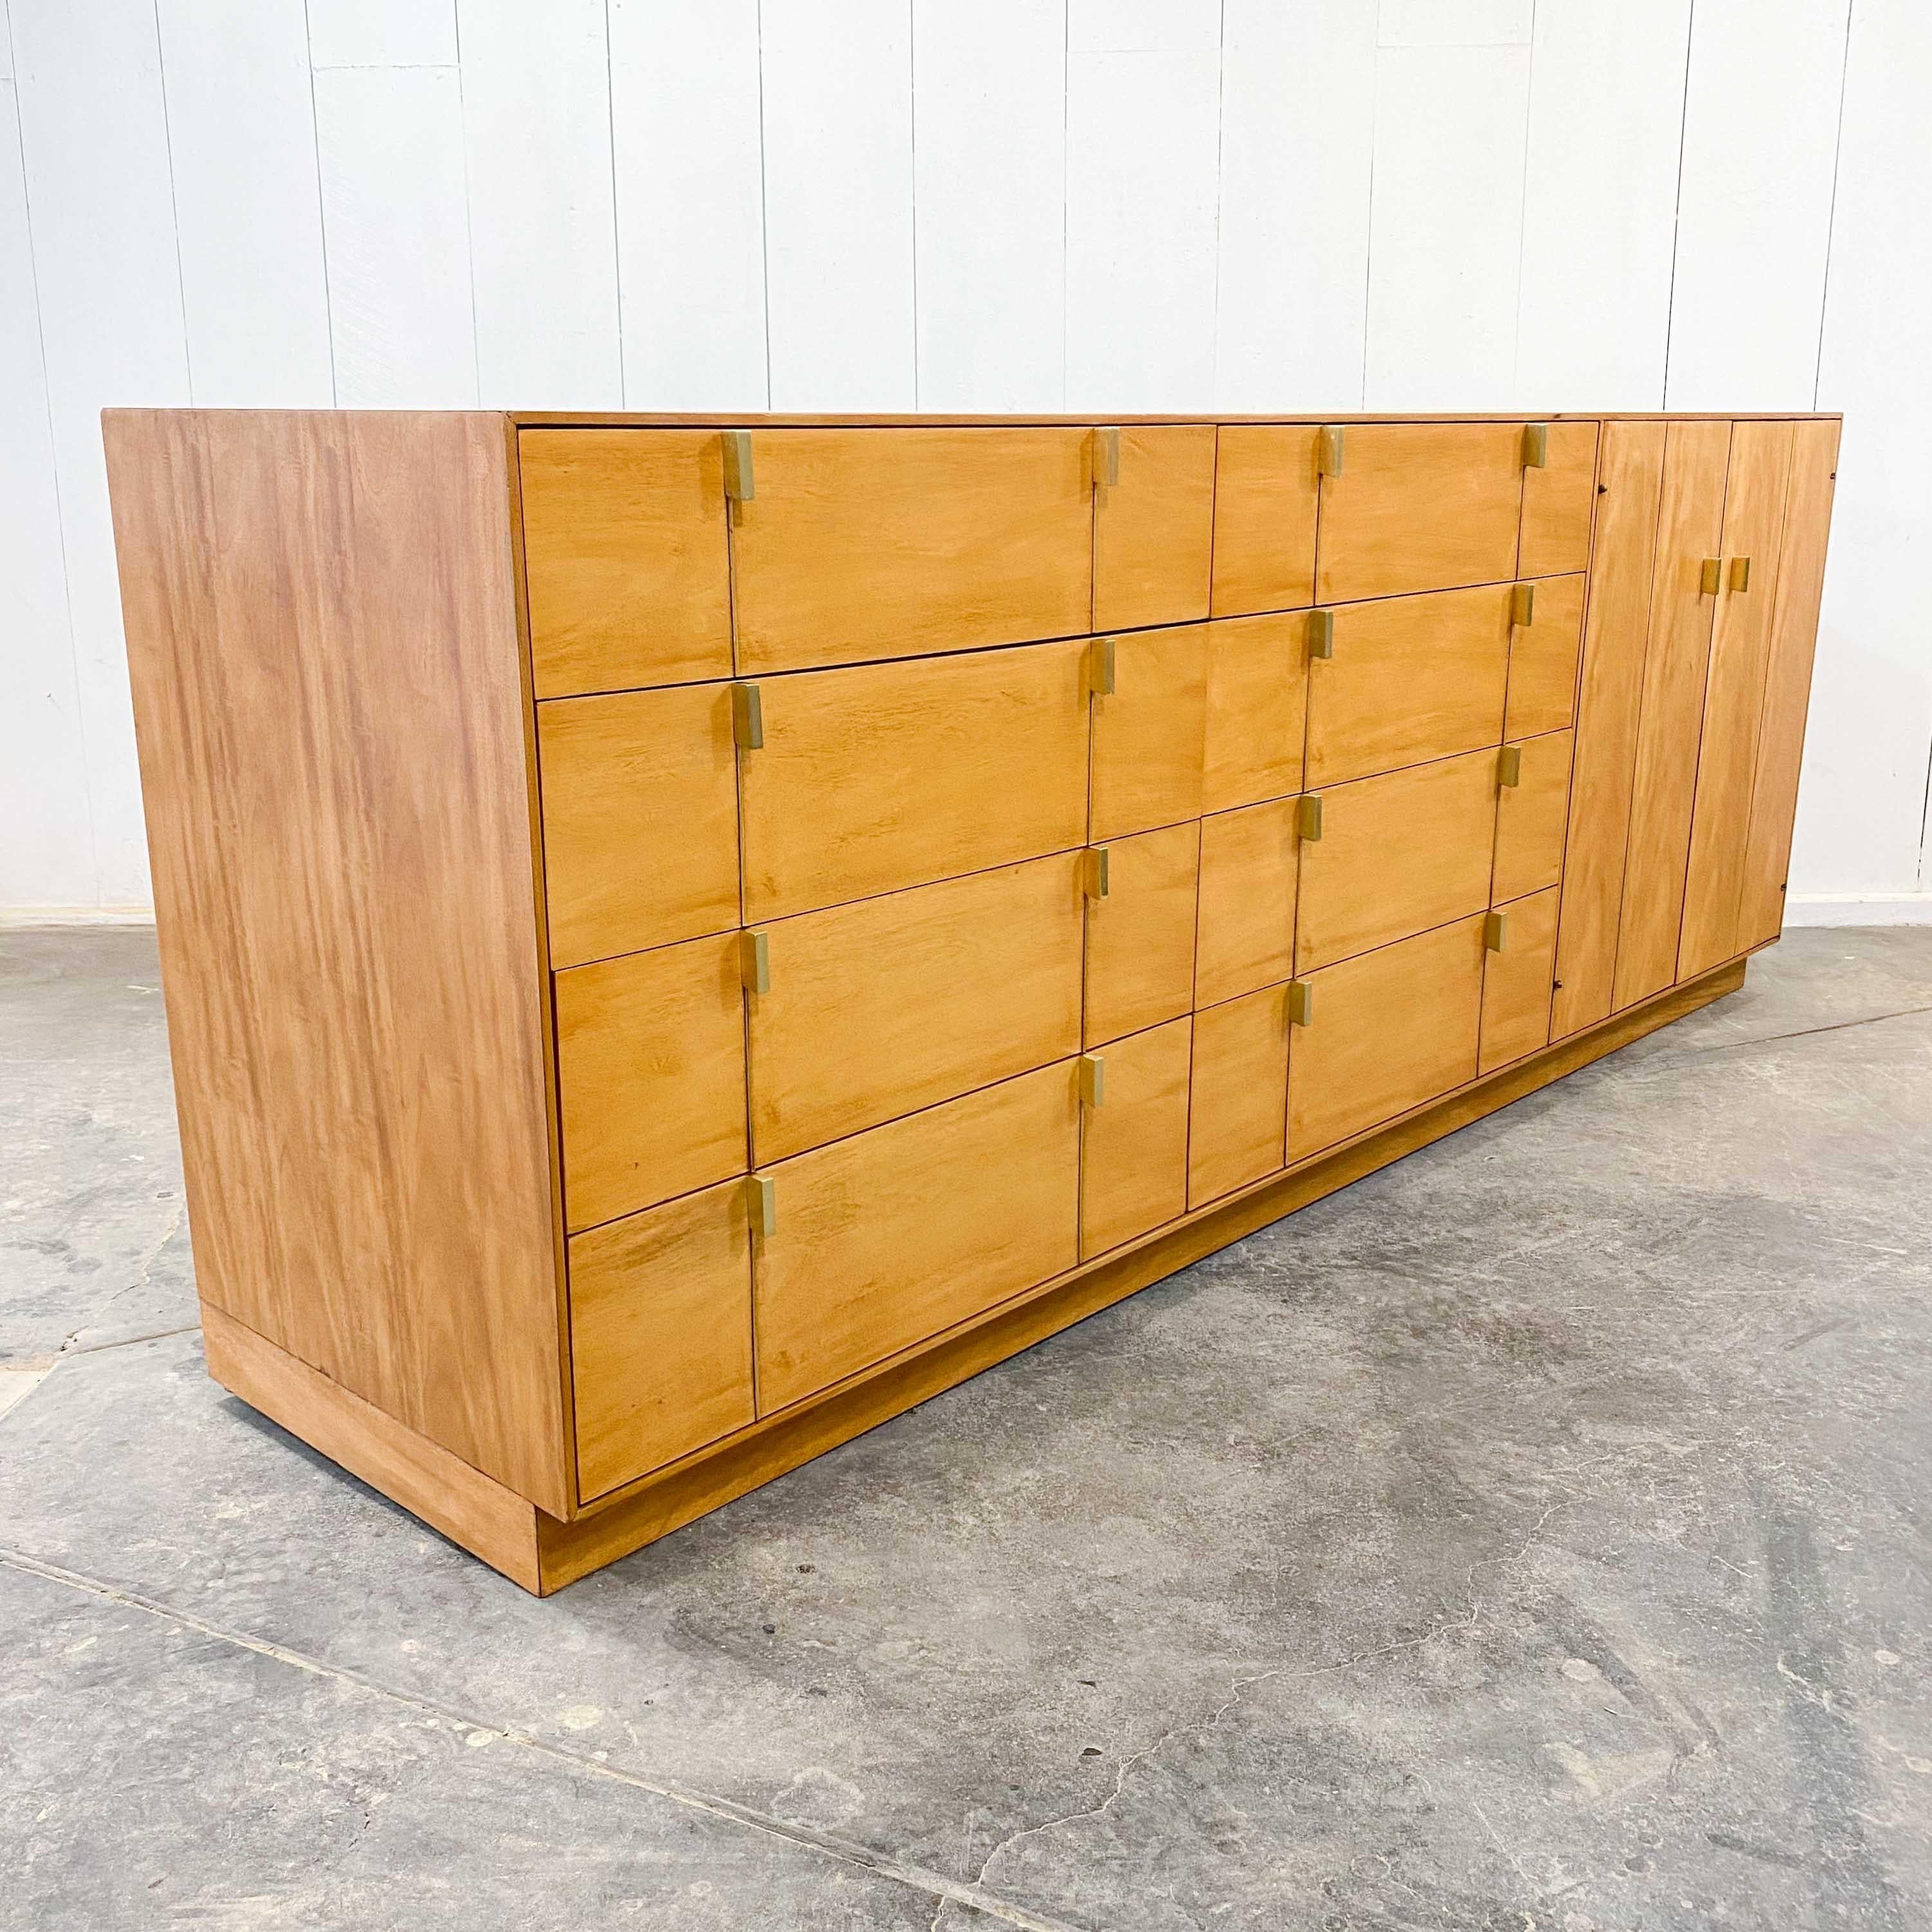 An 8 drawer dresser / sideboard with built in side cabinet to create a versatile storage unit by the Hickory Manufacturing Company of Hickory, North Carolina in 1983. 
A bleached mahogany veneered cabinet with elegant brass pulls restored to its